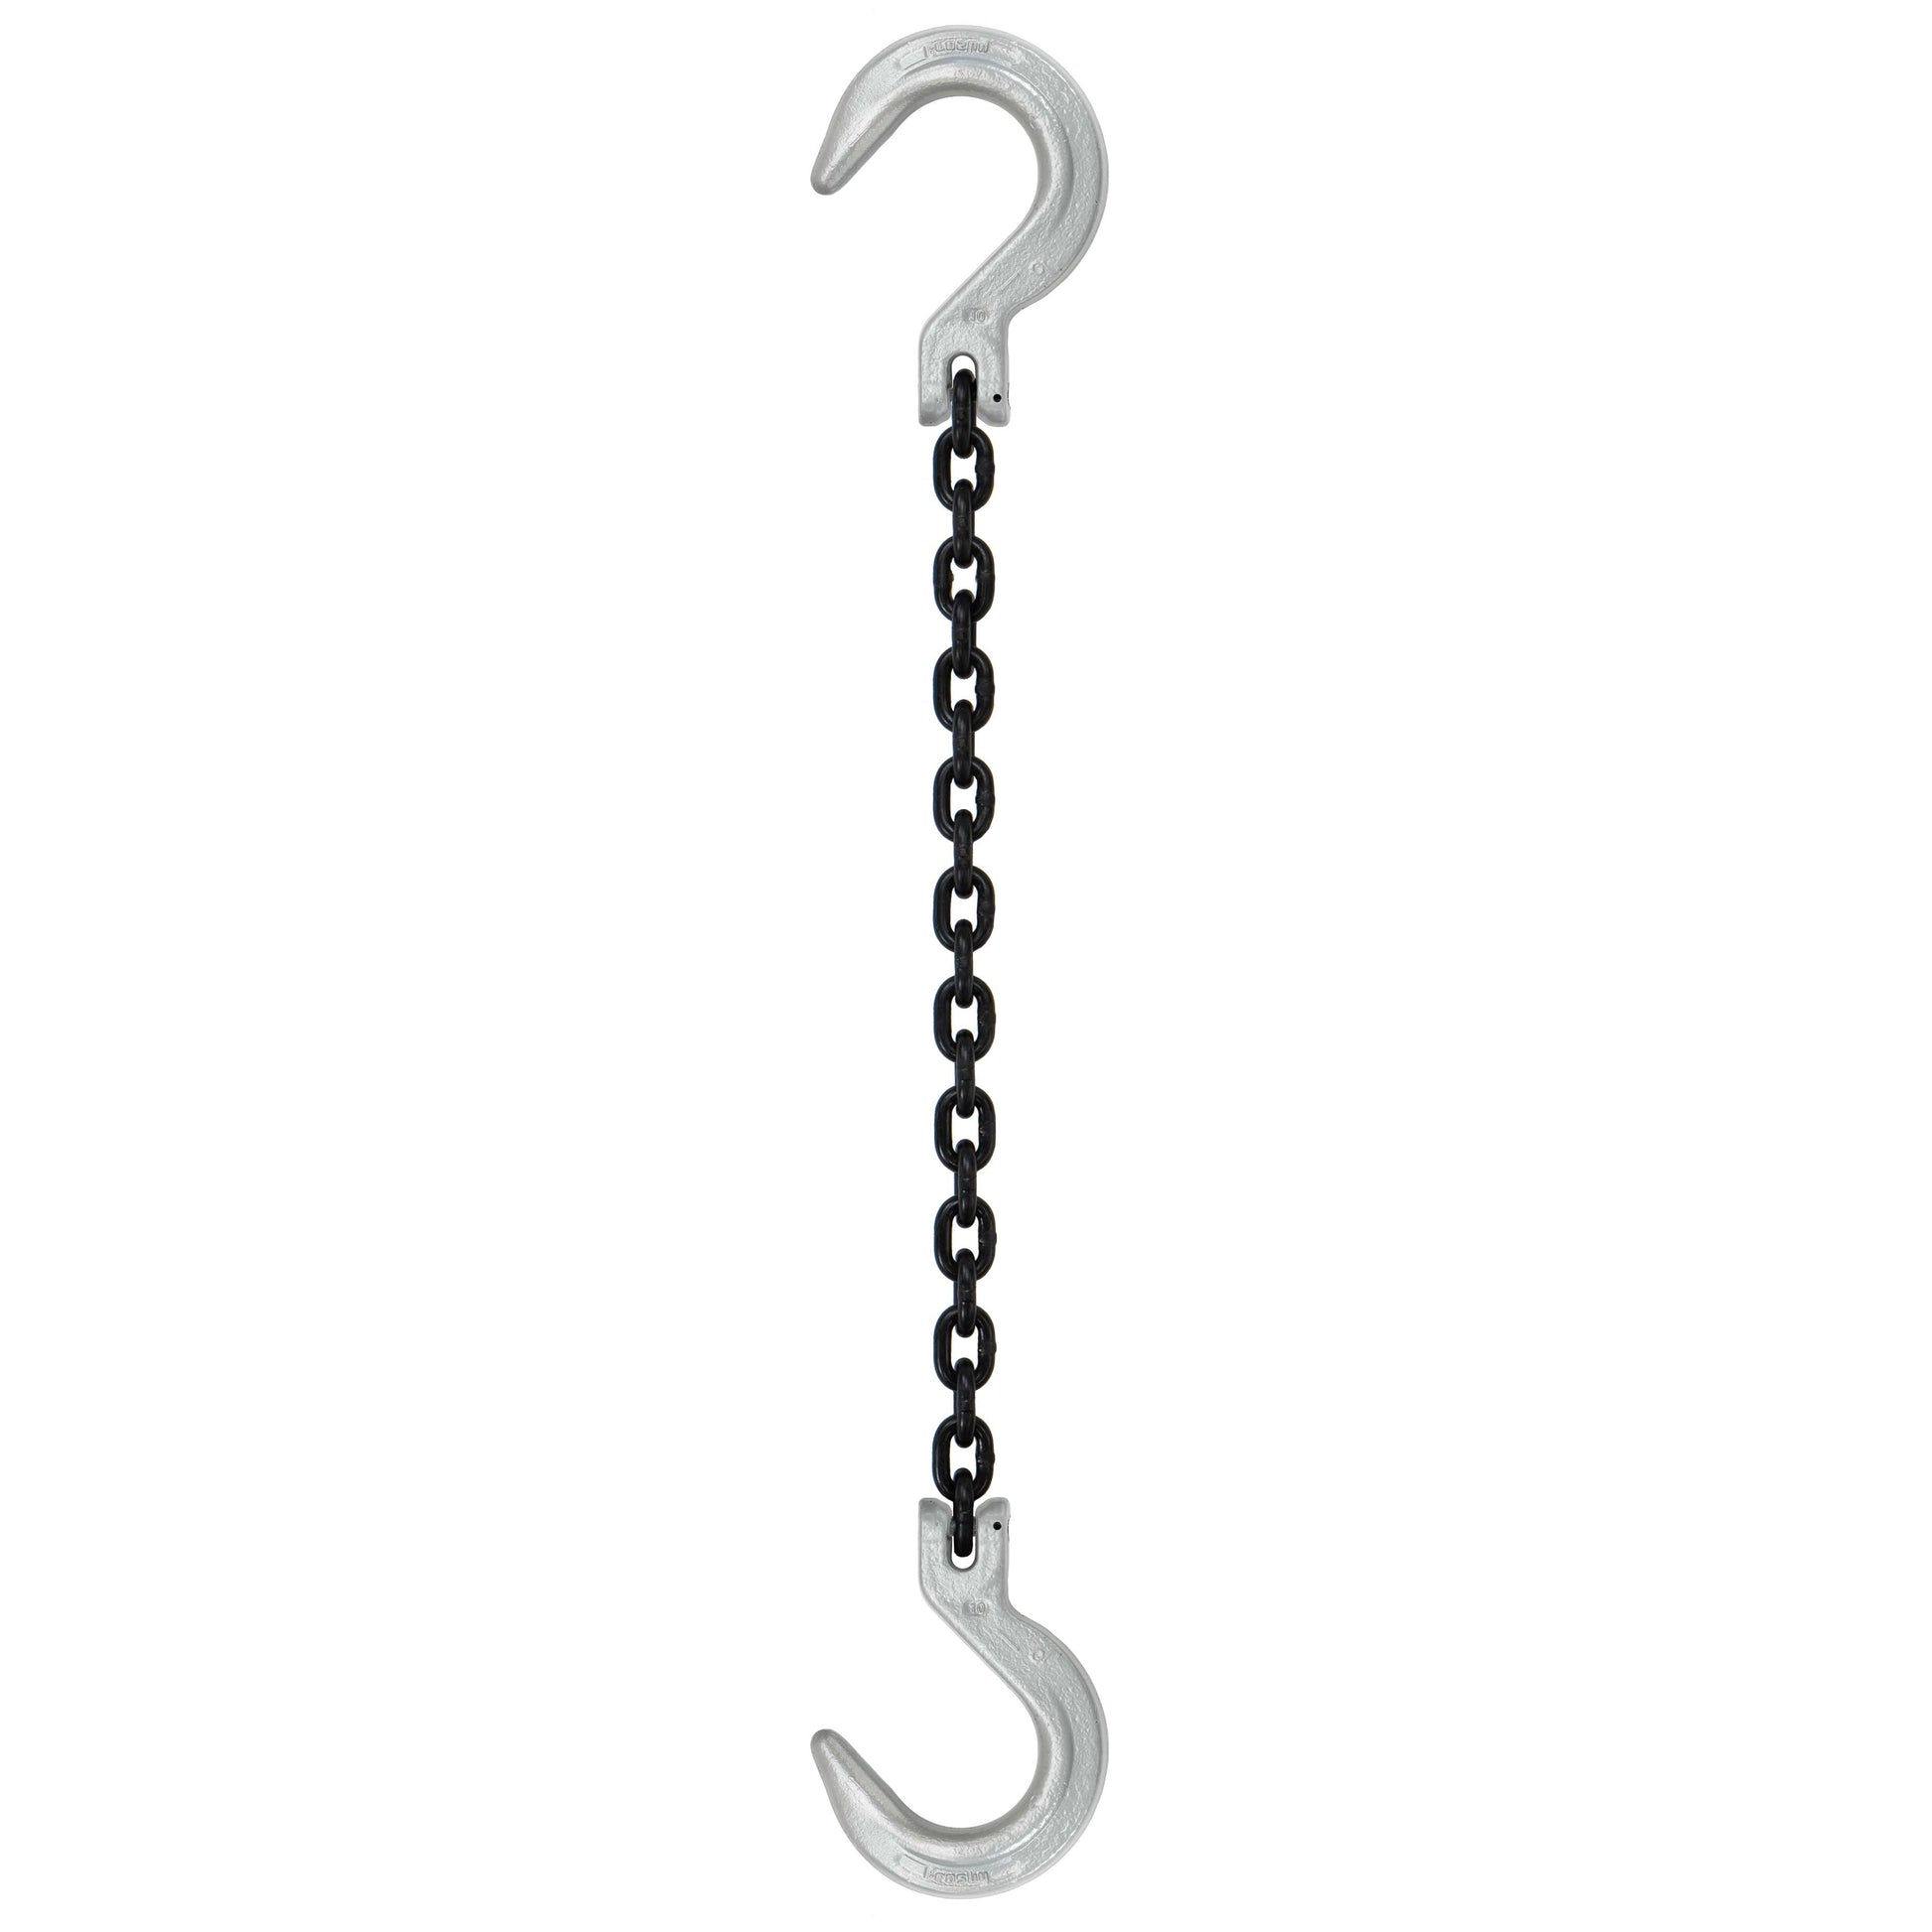 12 inch x 8 foot Domestic Single Leg Chain Sling w Crosby Foundry & Foundry Hooks Grade 100 image 1 of 2